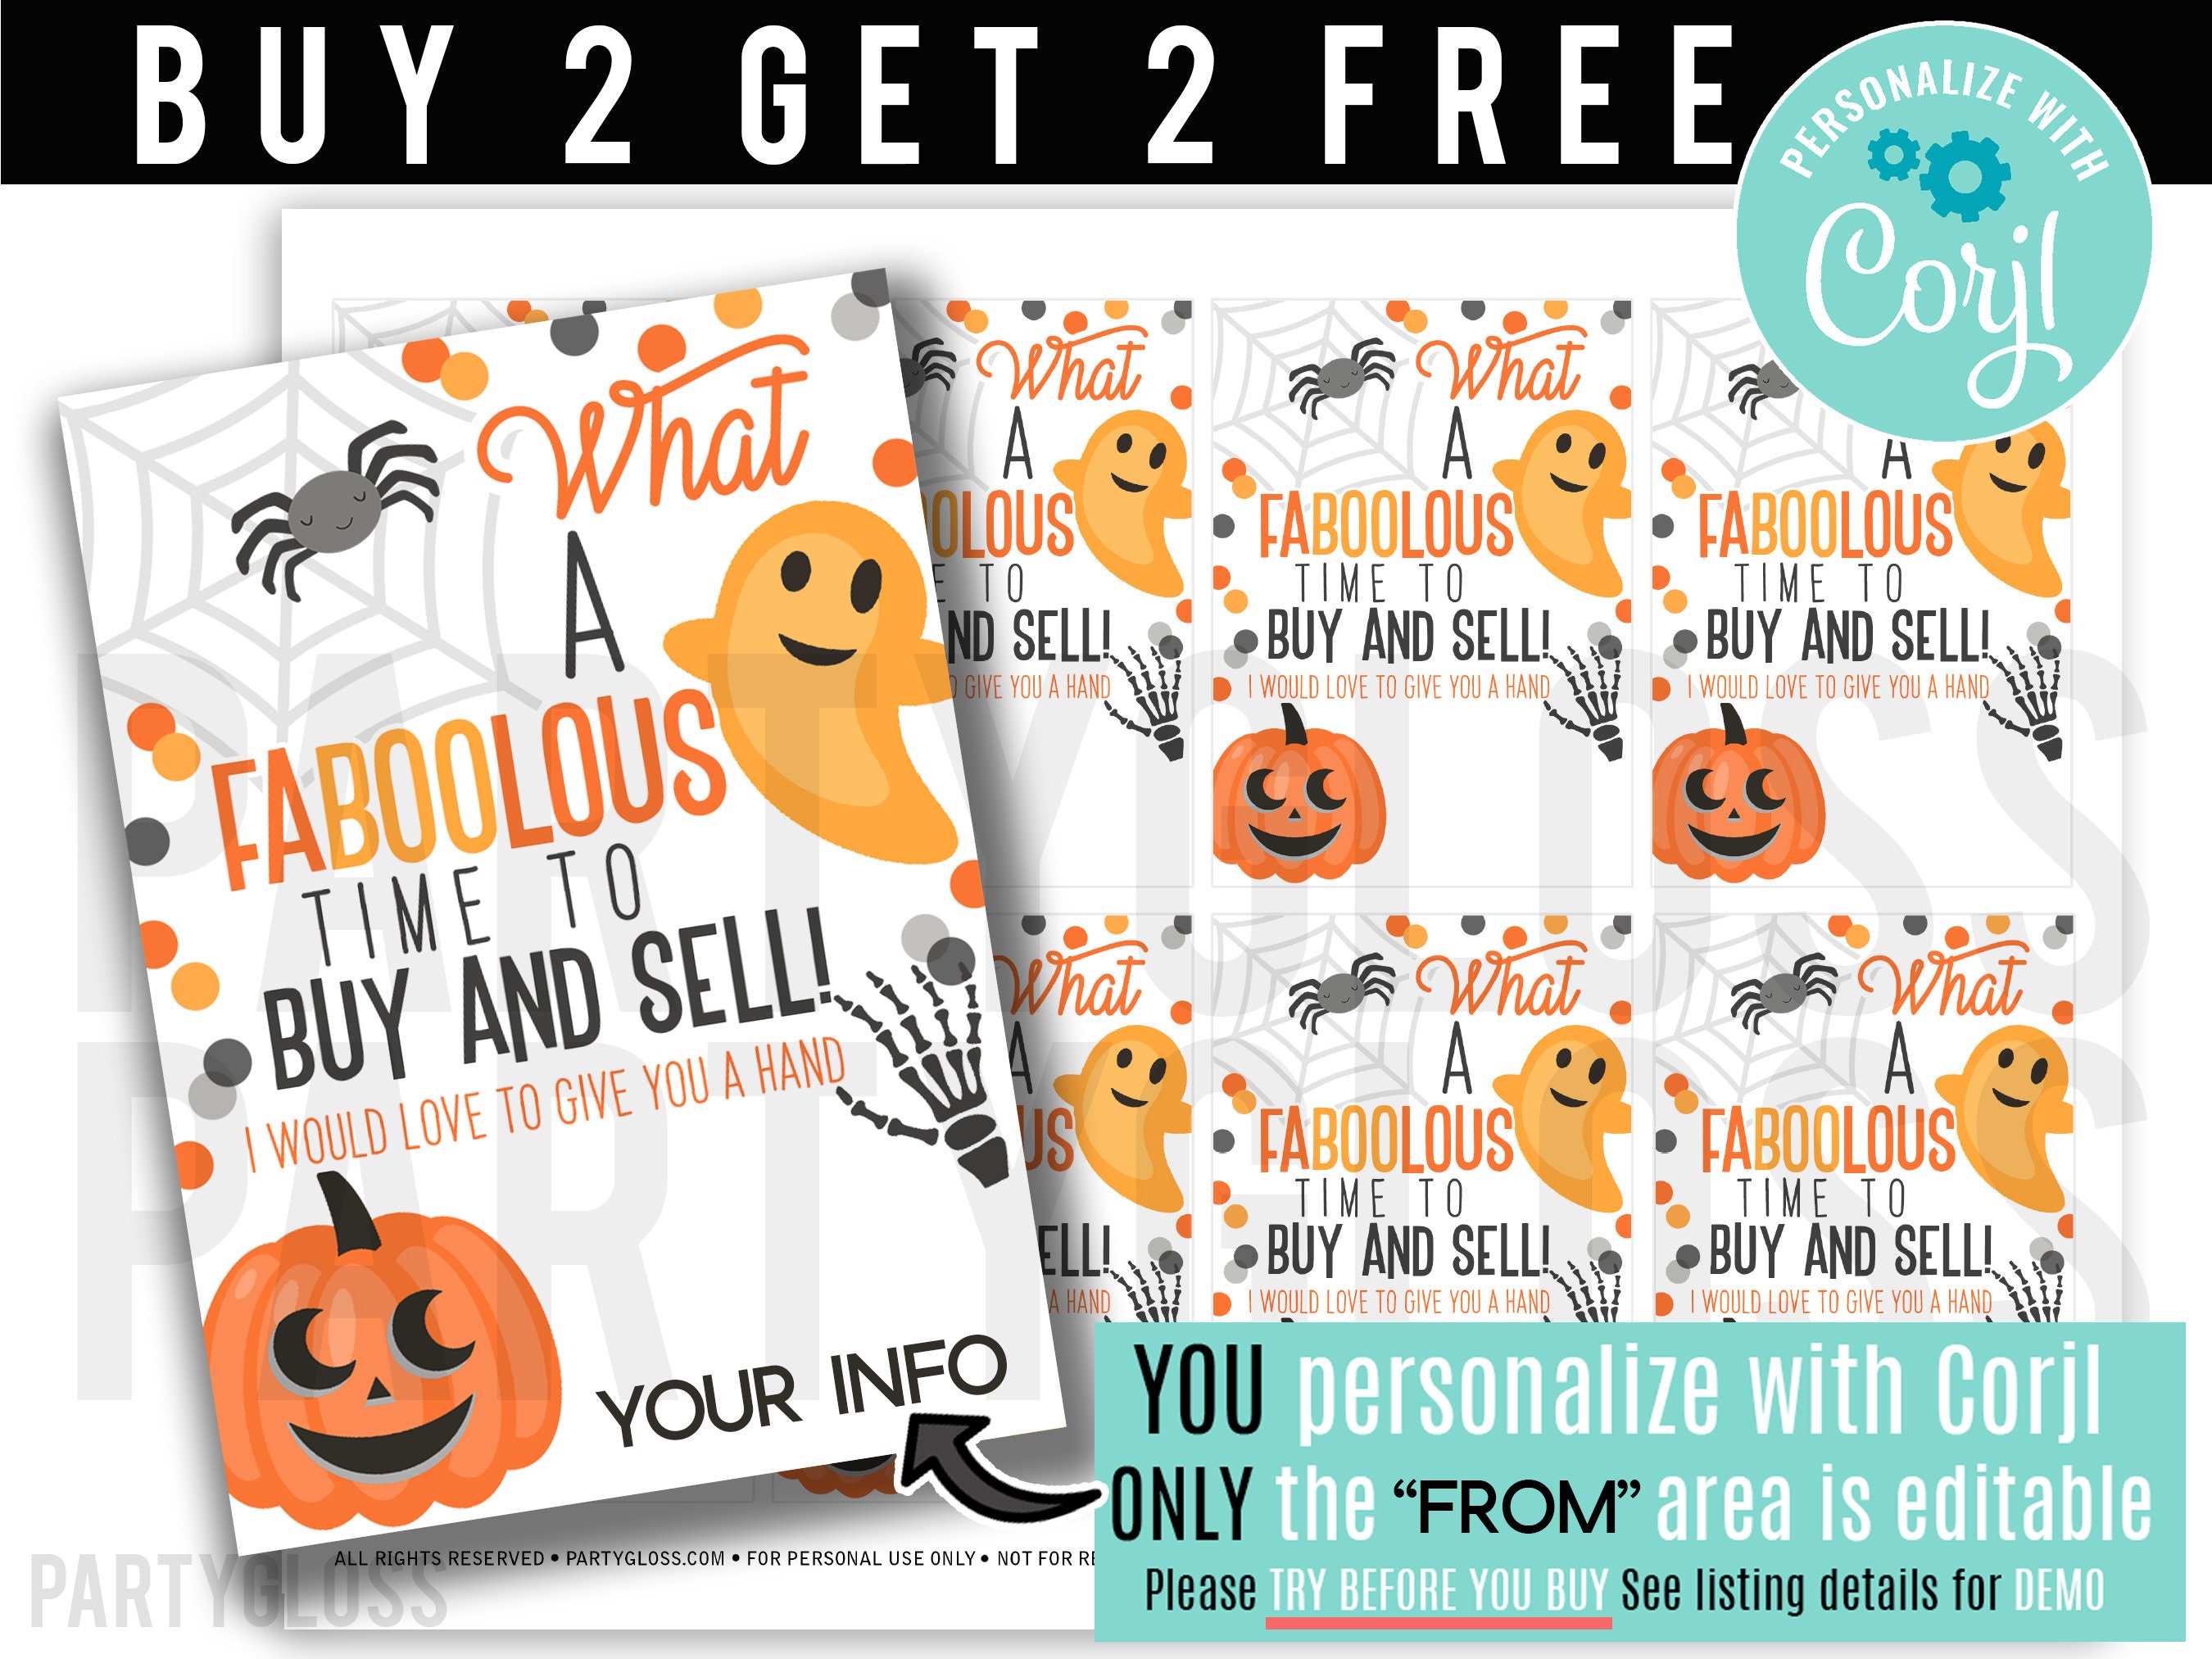 Free Halloween Real Estate GIFs: Boost Your Social Media Engagement